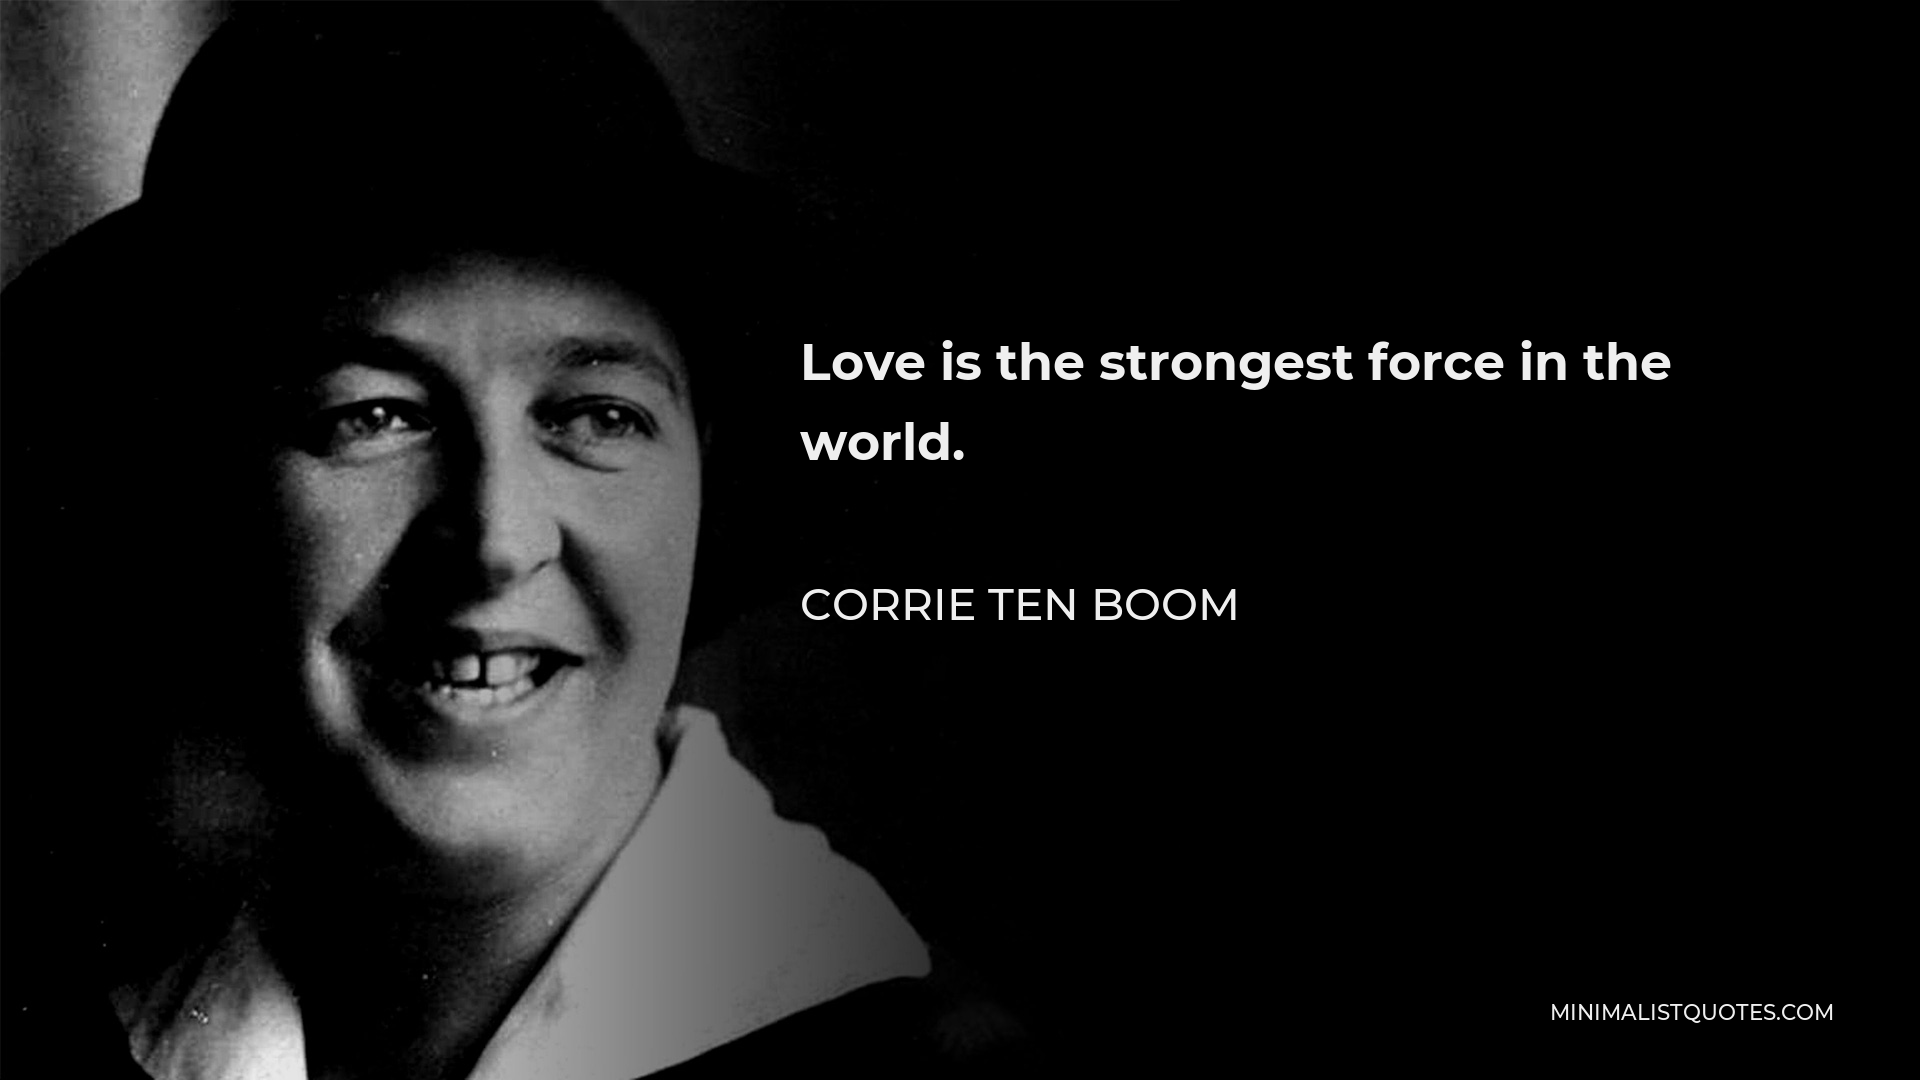 Corrie ten Boom Quote - Love is the strongest force in the world.